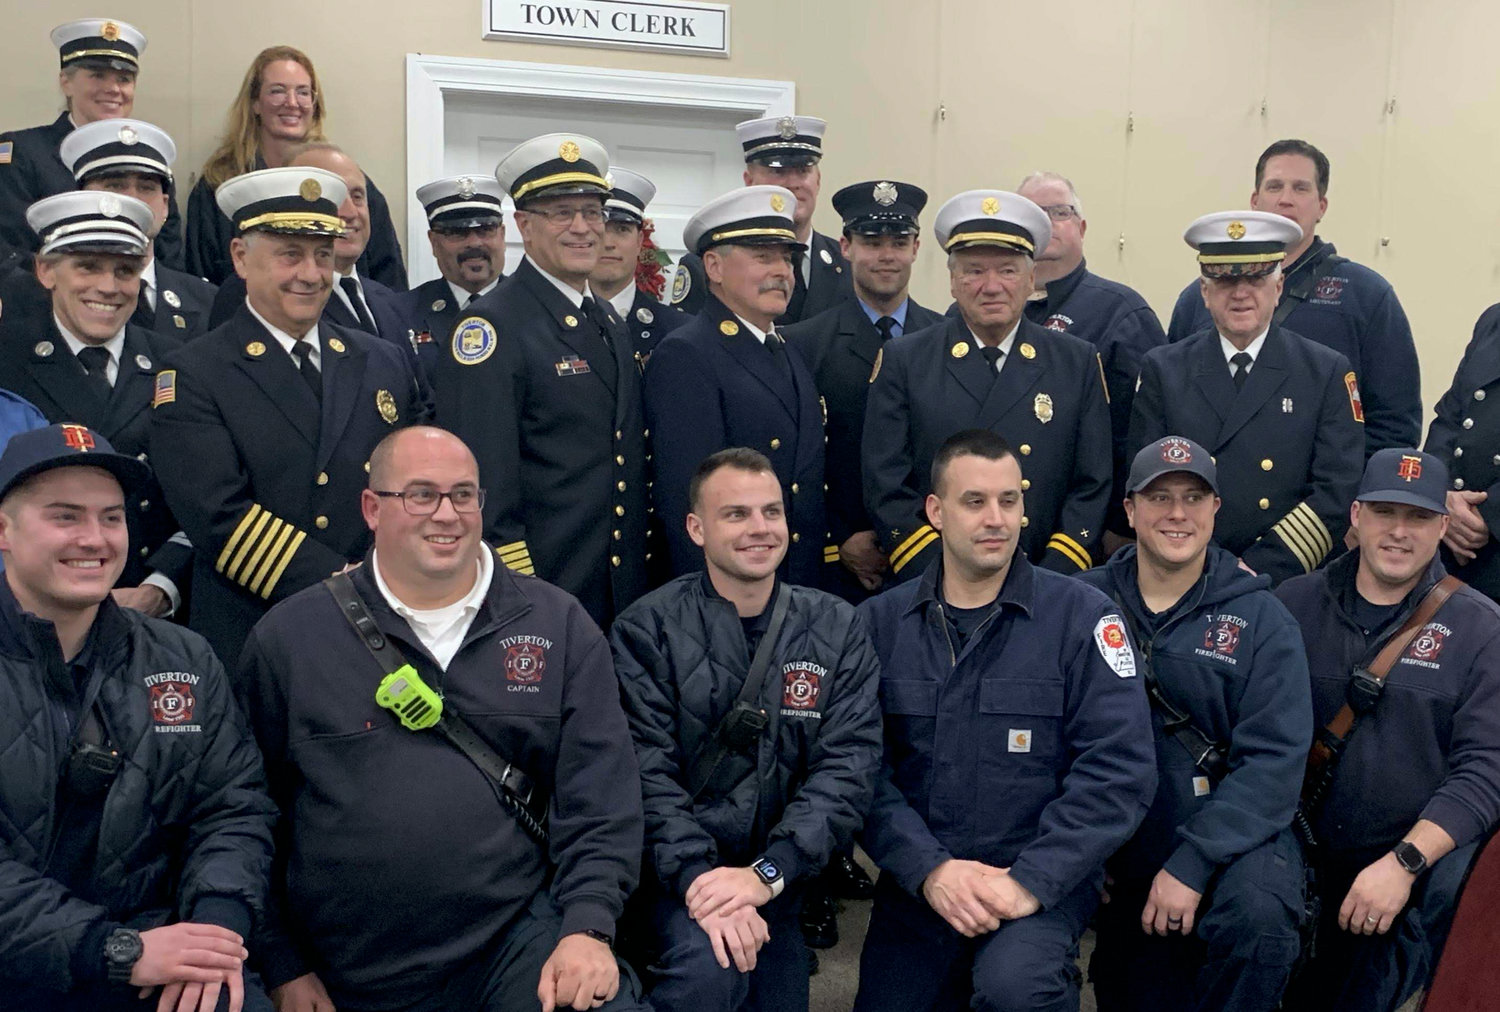 RASMUSSEN

Tiverton Fire Chief William S. Bailey III (middle row, third from left) poses for a photo with his department after his swearing in Monday evening.